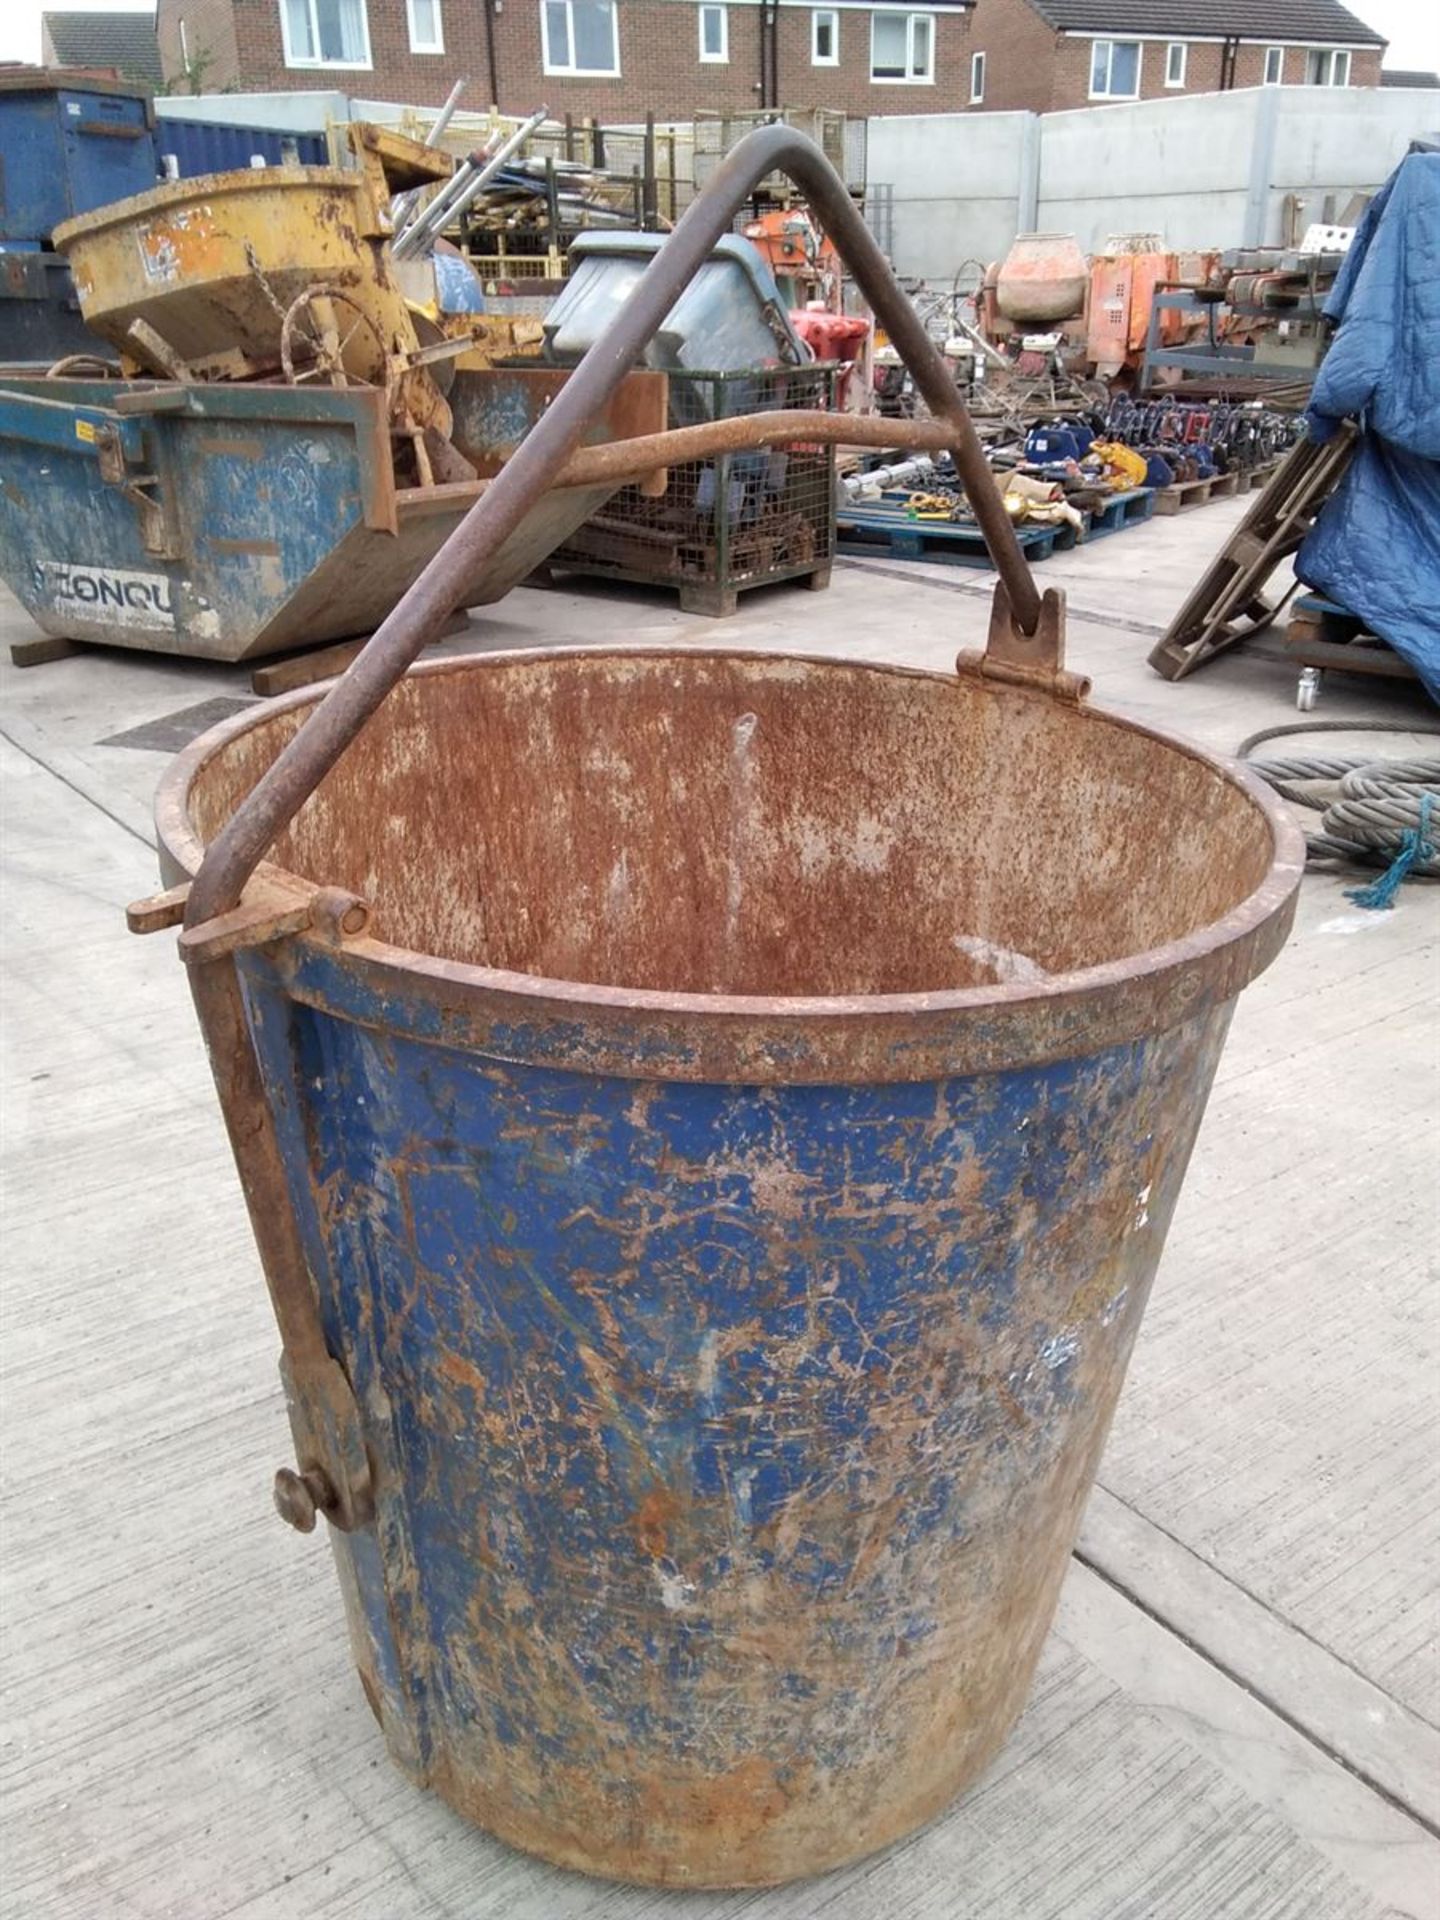 Conquip Muck Tipping Skip 1000Ltr - Image 2 of 2